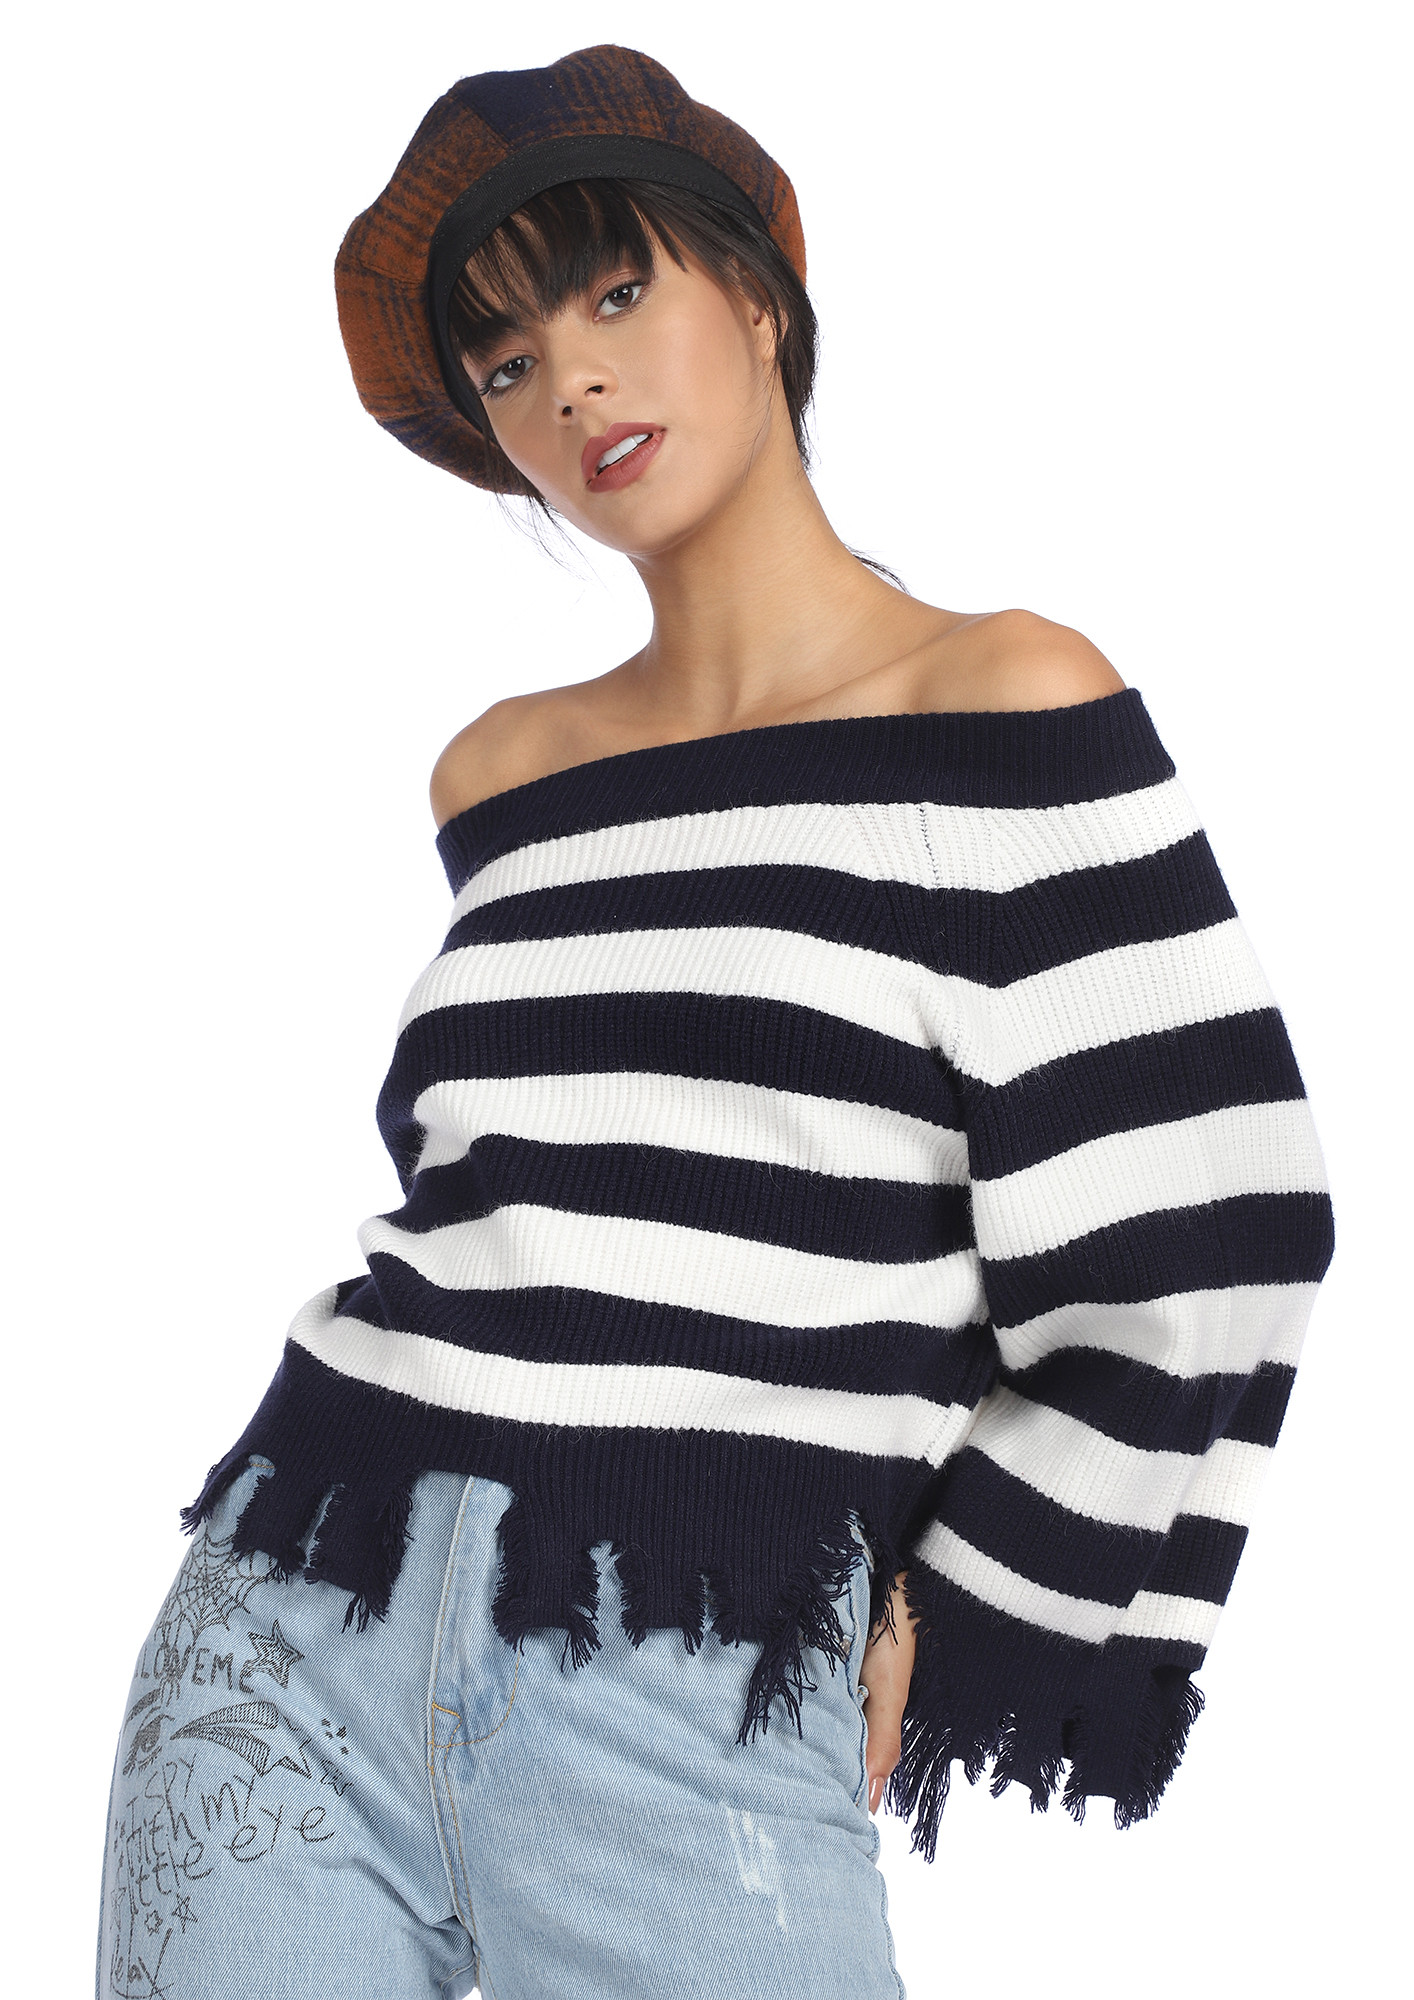 GONE FOR THE WARMTH NAVY CROPPED JUMPER